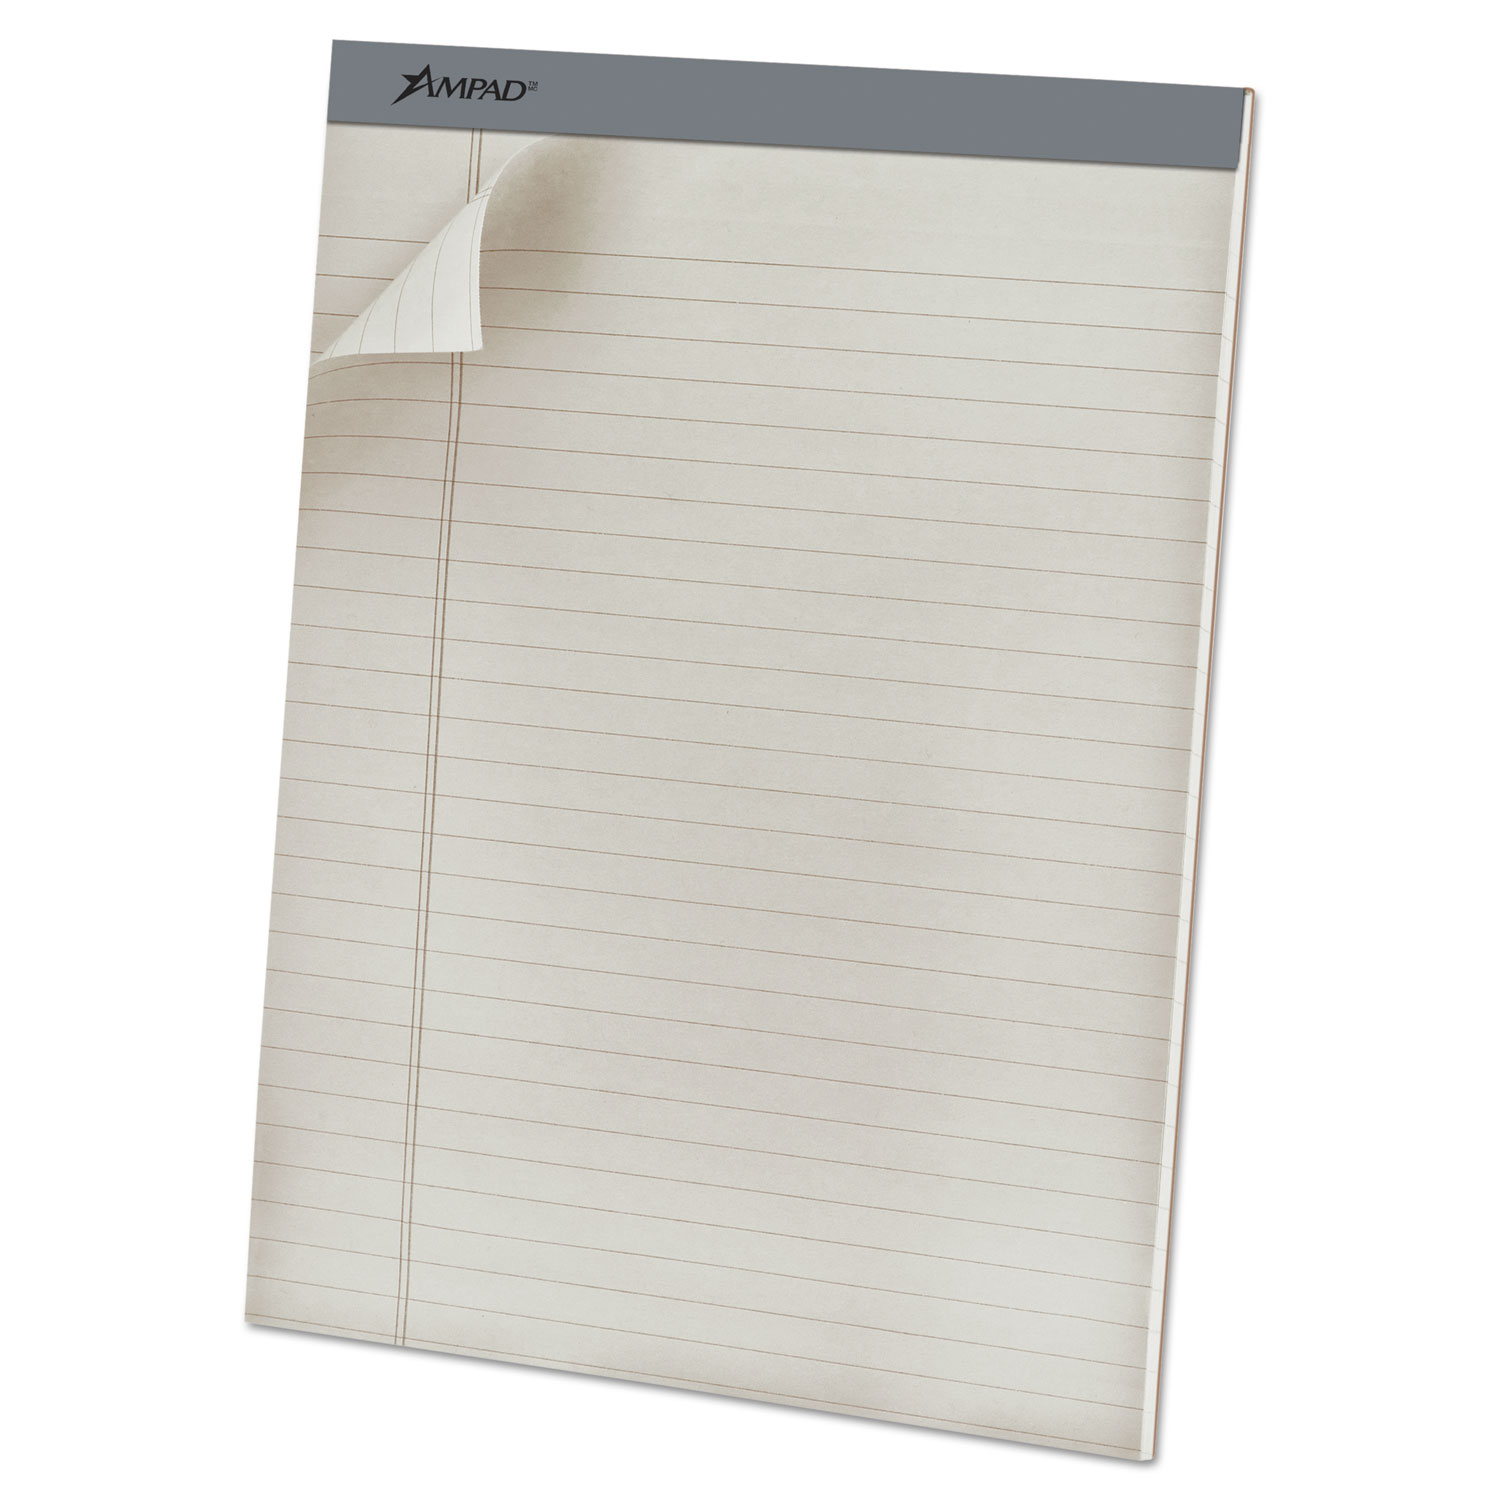  Ampad 20-620 Pastel Writing Pads, Wide/Legal Rule, 8.5 x 11.75, Gray, 50 Sheets, Dozen (TOP20620) 